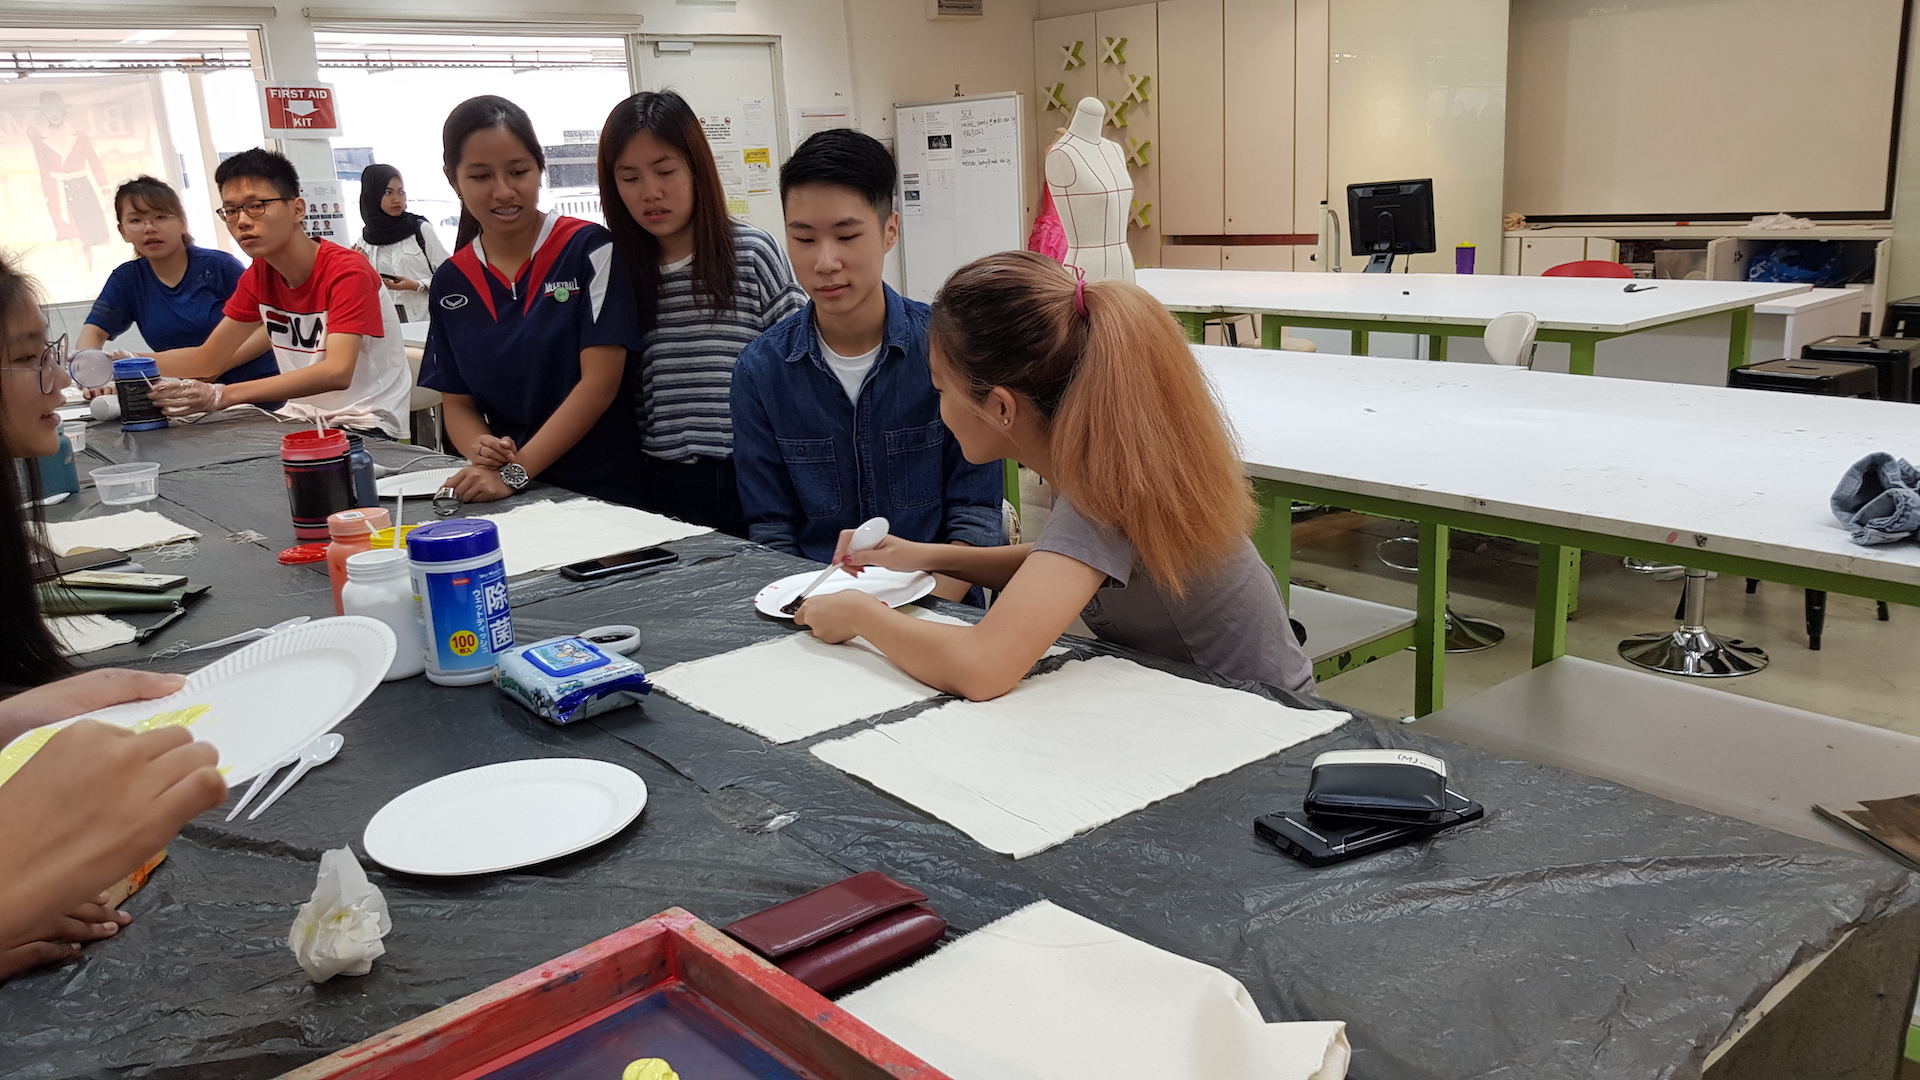 MDIS college students engaging in some art work in the fashion lab.